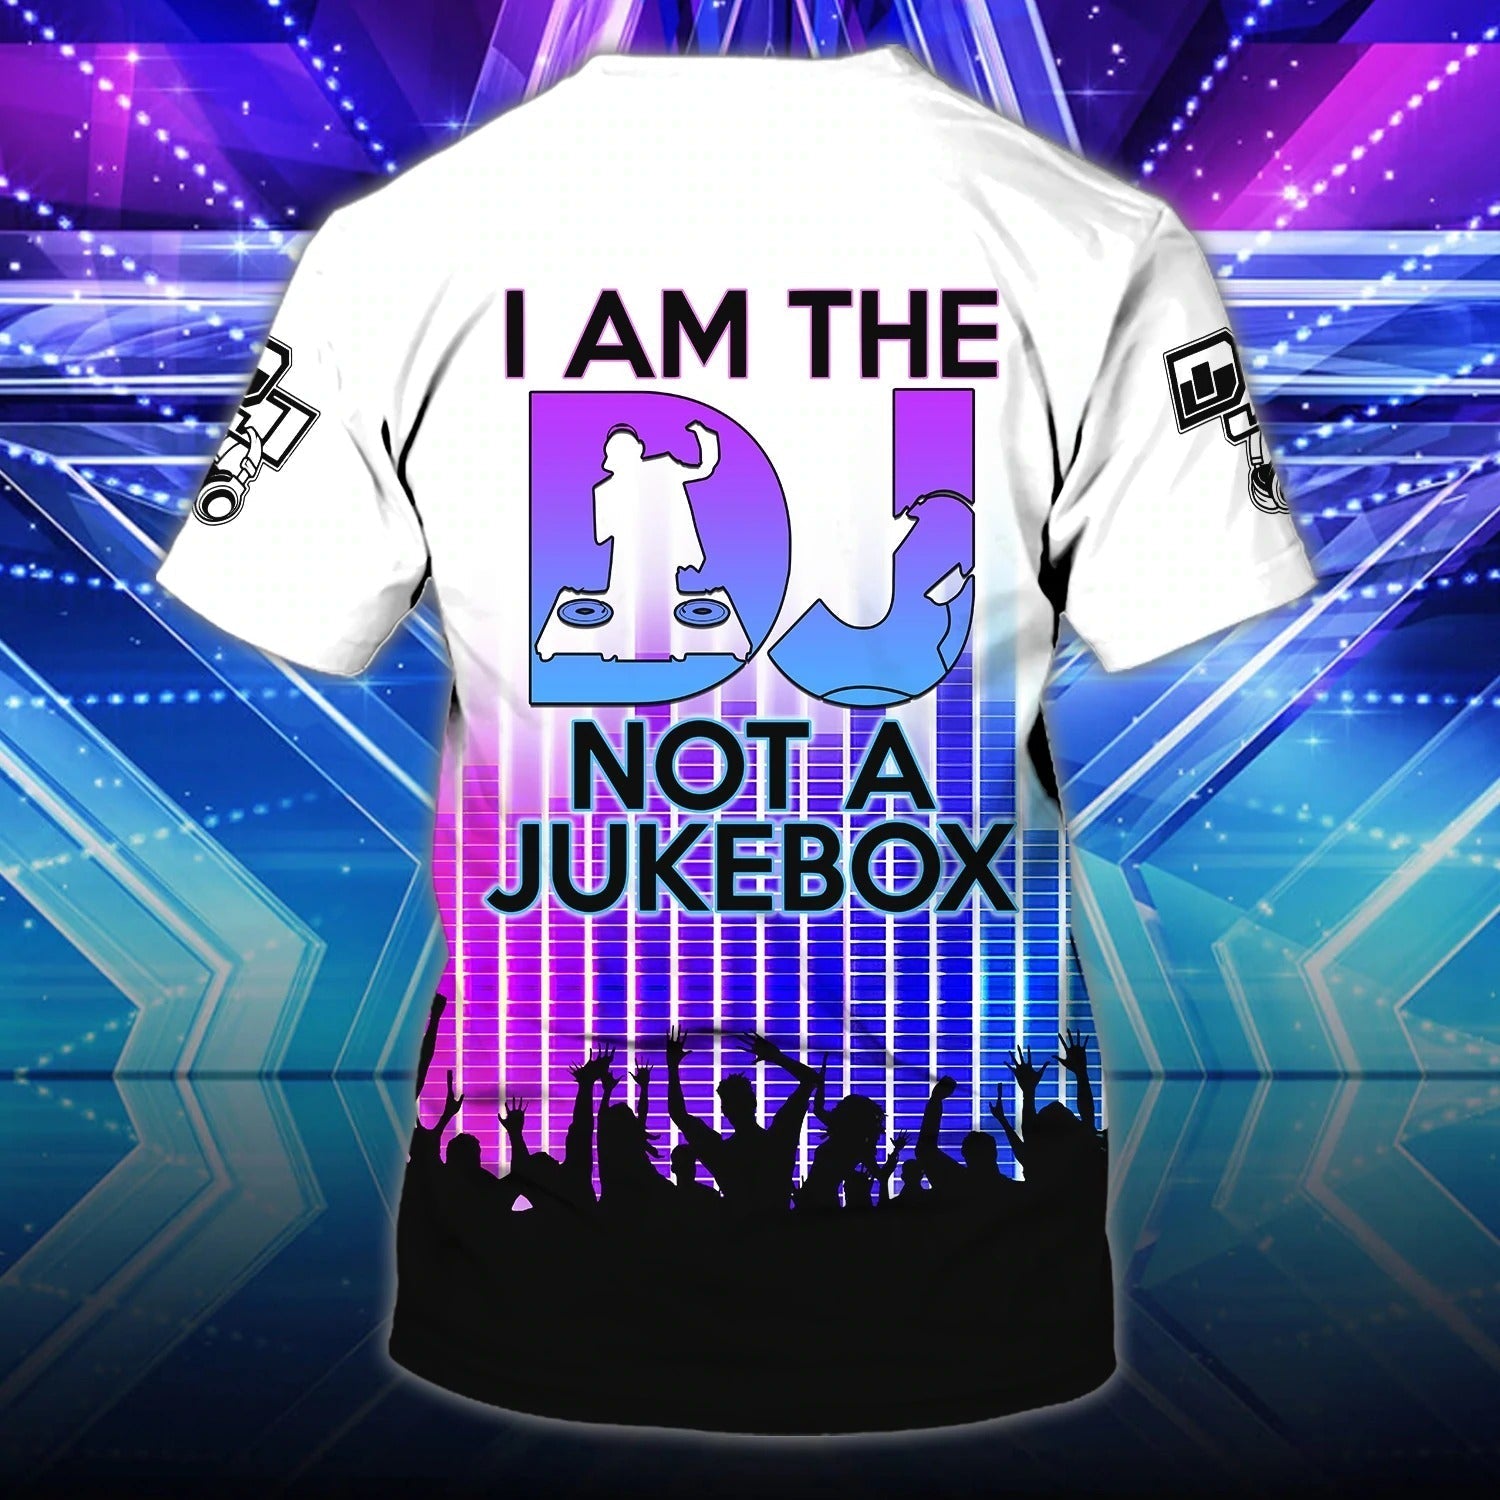 Personalized Funny Dj Shirt 3D/ Playing Dj In Universe/ Headphone And Dj T Shirt Party/ Gift To Musican And Dj